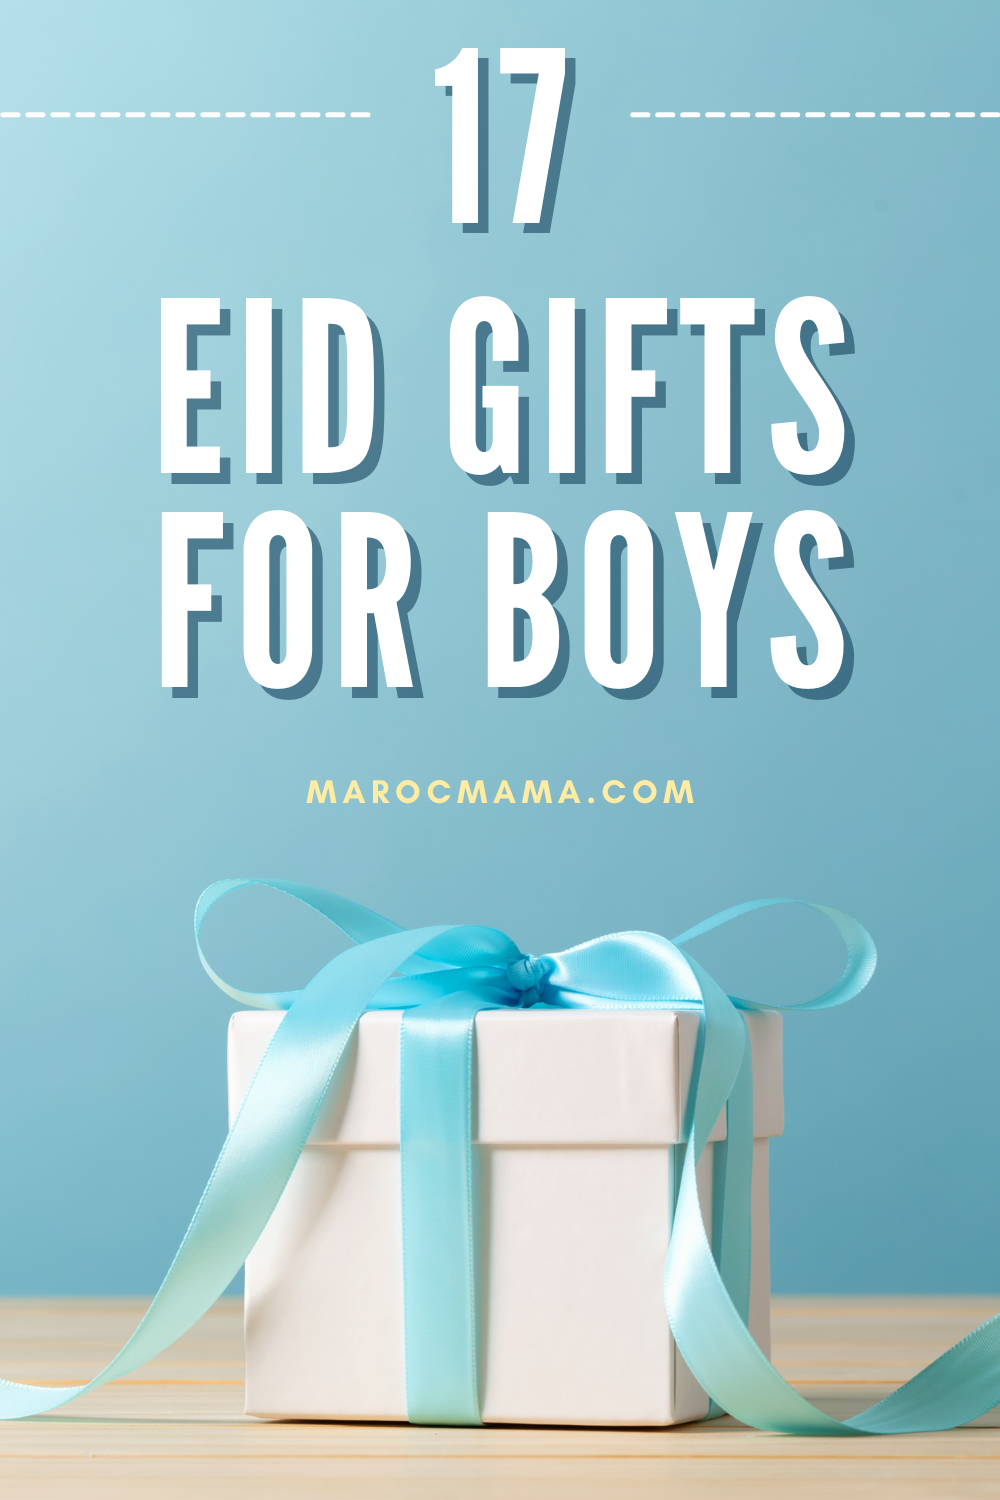 14 Eid Gifts for Kids Who Have Everything - MarocMama